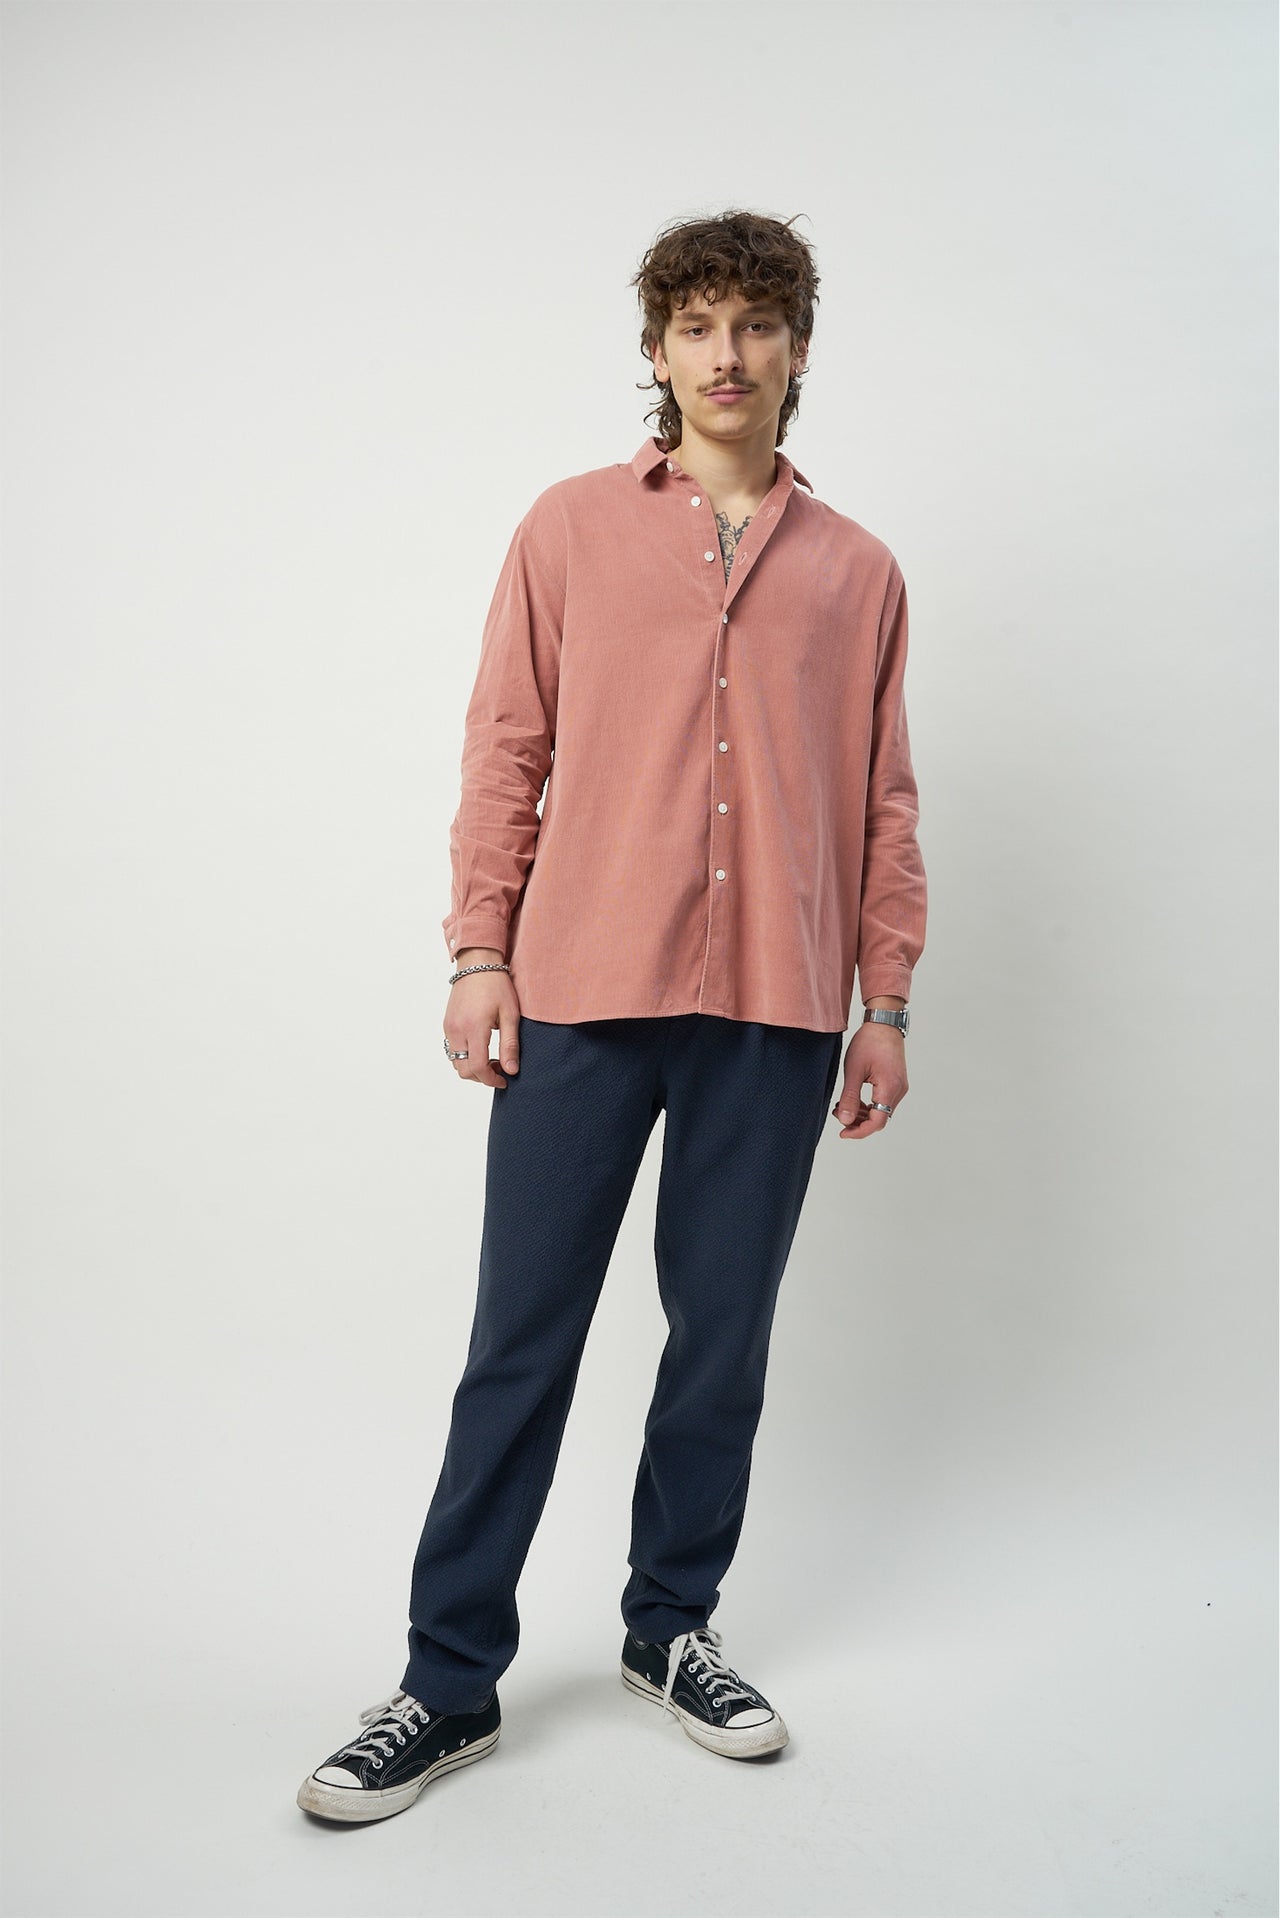 Boxy Unisex Shirt in Dusty Pink in the finest Japanese Baby Corduroy